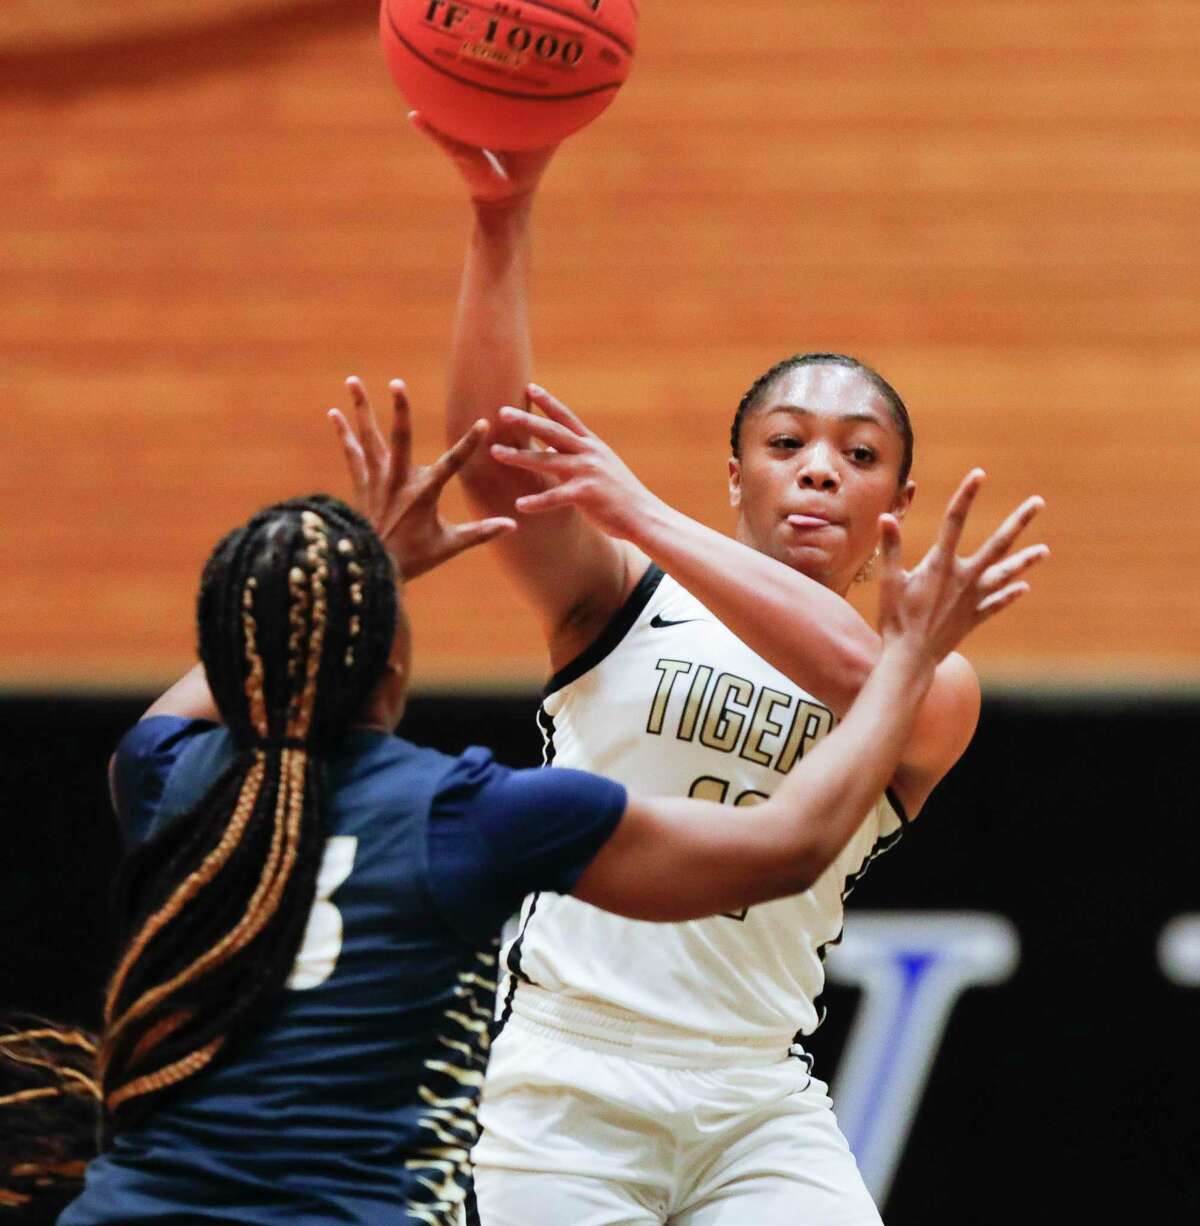 Conroe's Kennedy Powell (11) makes a long pass during the third quarter of a Region II-6A quarterfinal high school basketball playoff game at Dekaney High School, Tuesday, Feb. 22, 2022, in Spring.